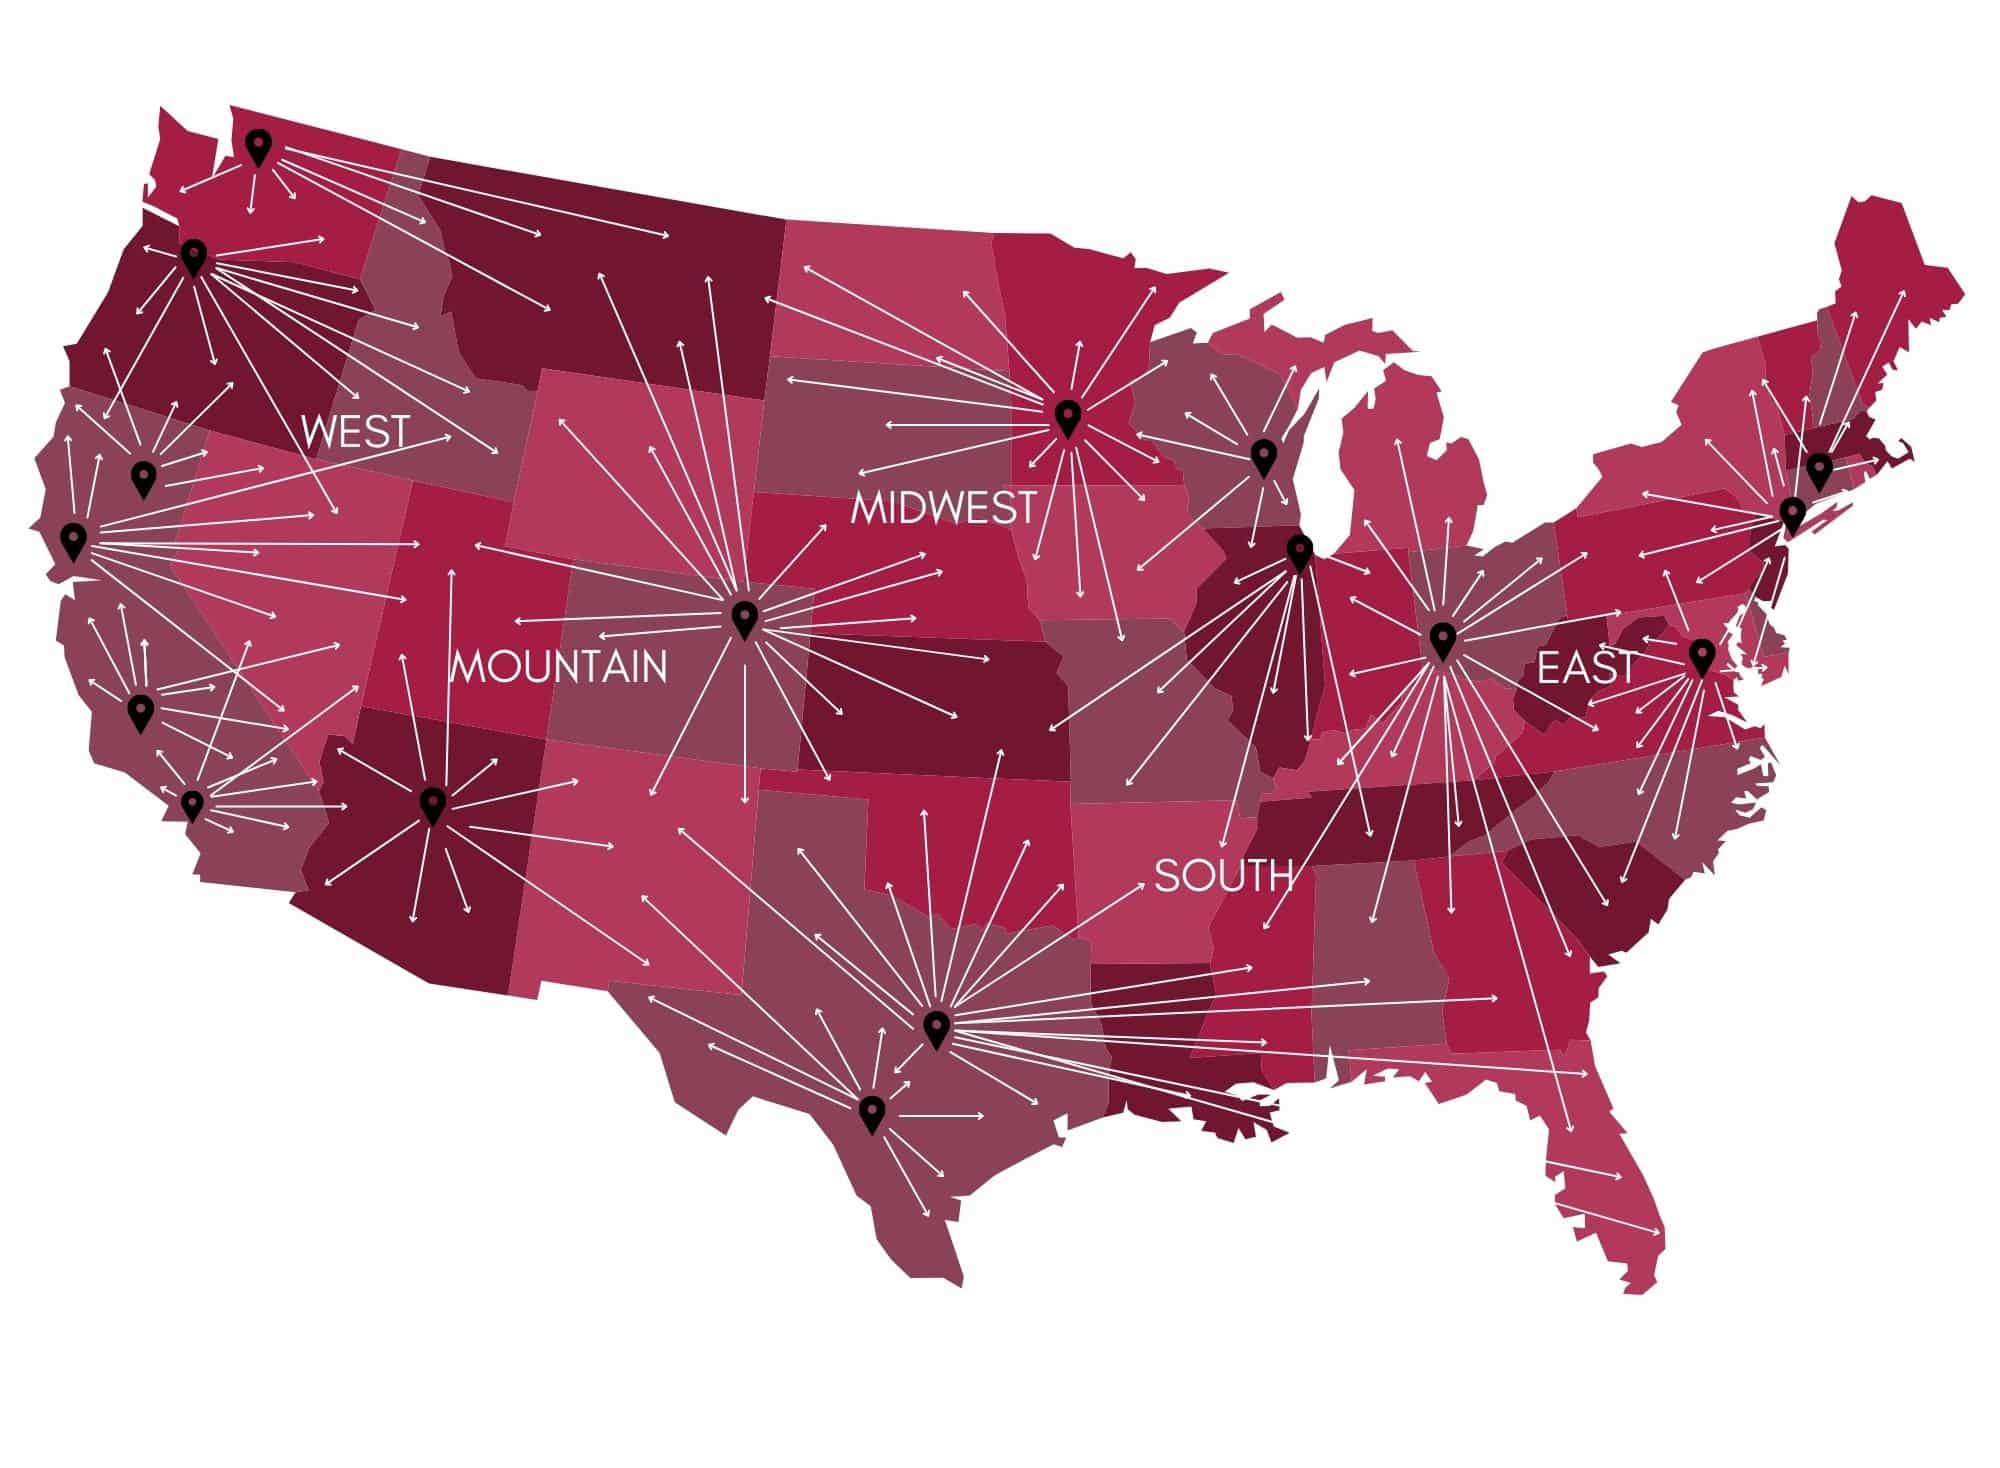 Image of Nation Reach of Scion Executive Search of a map of the US and arrows showing the company works with the full country